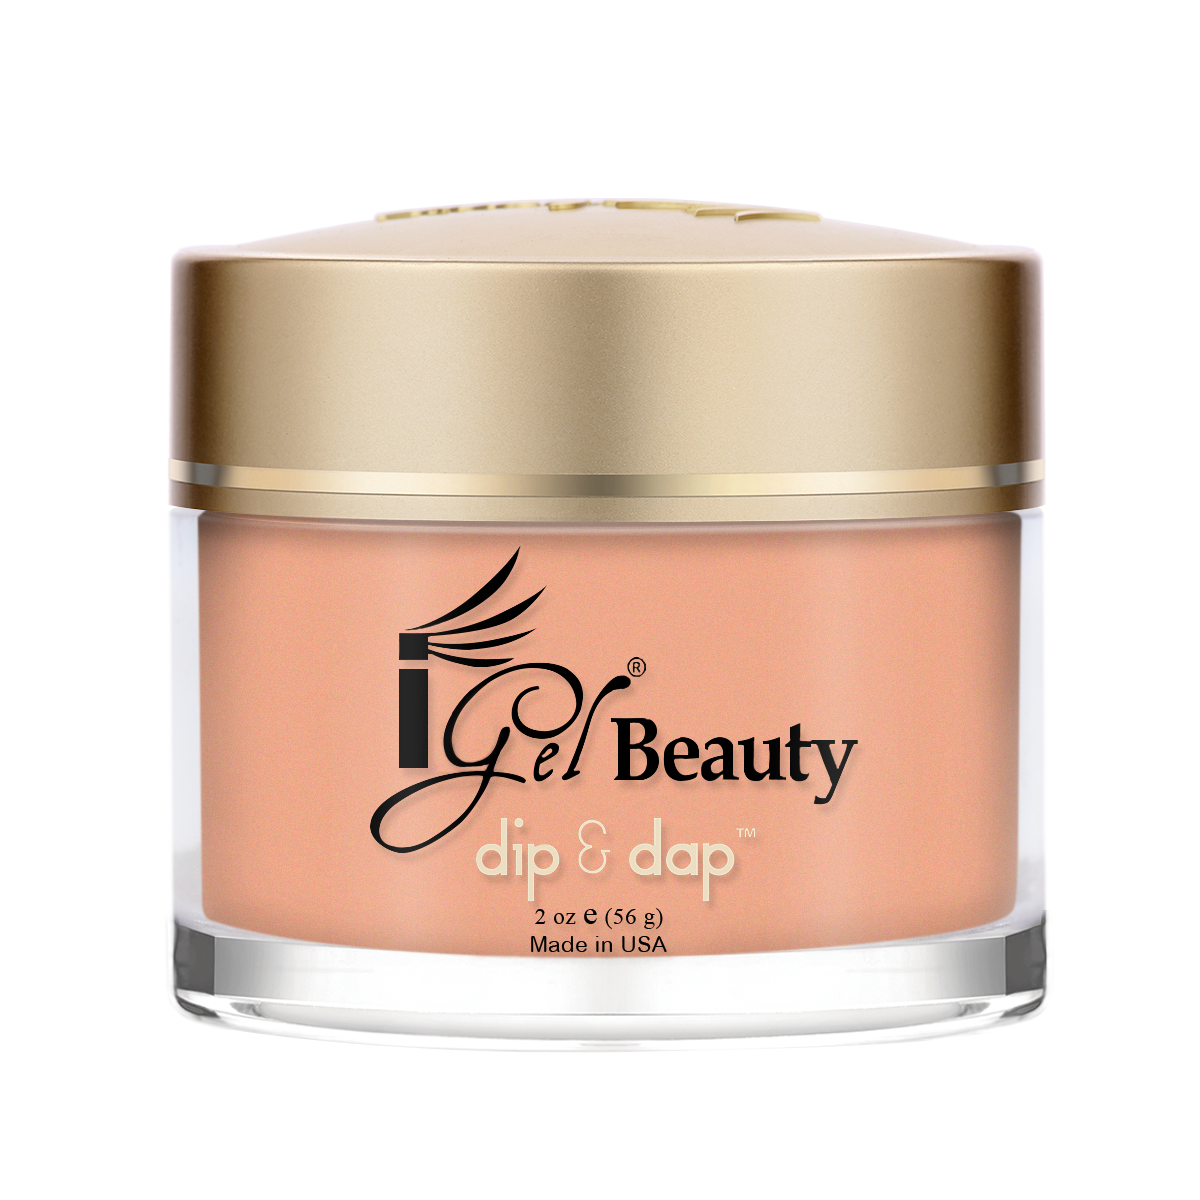 DD290 Better Together Dip and Dap Powder 2oz By IGel Beauty